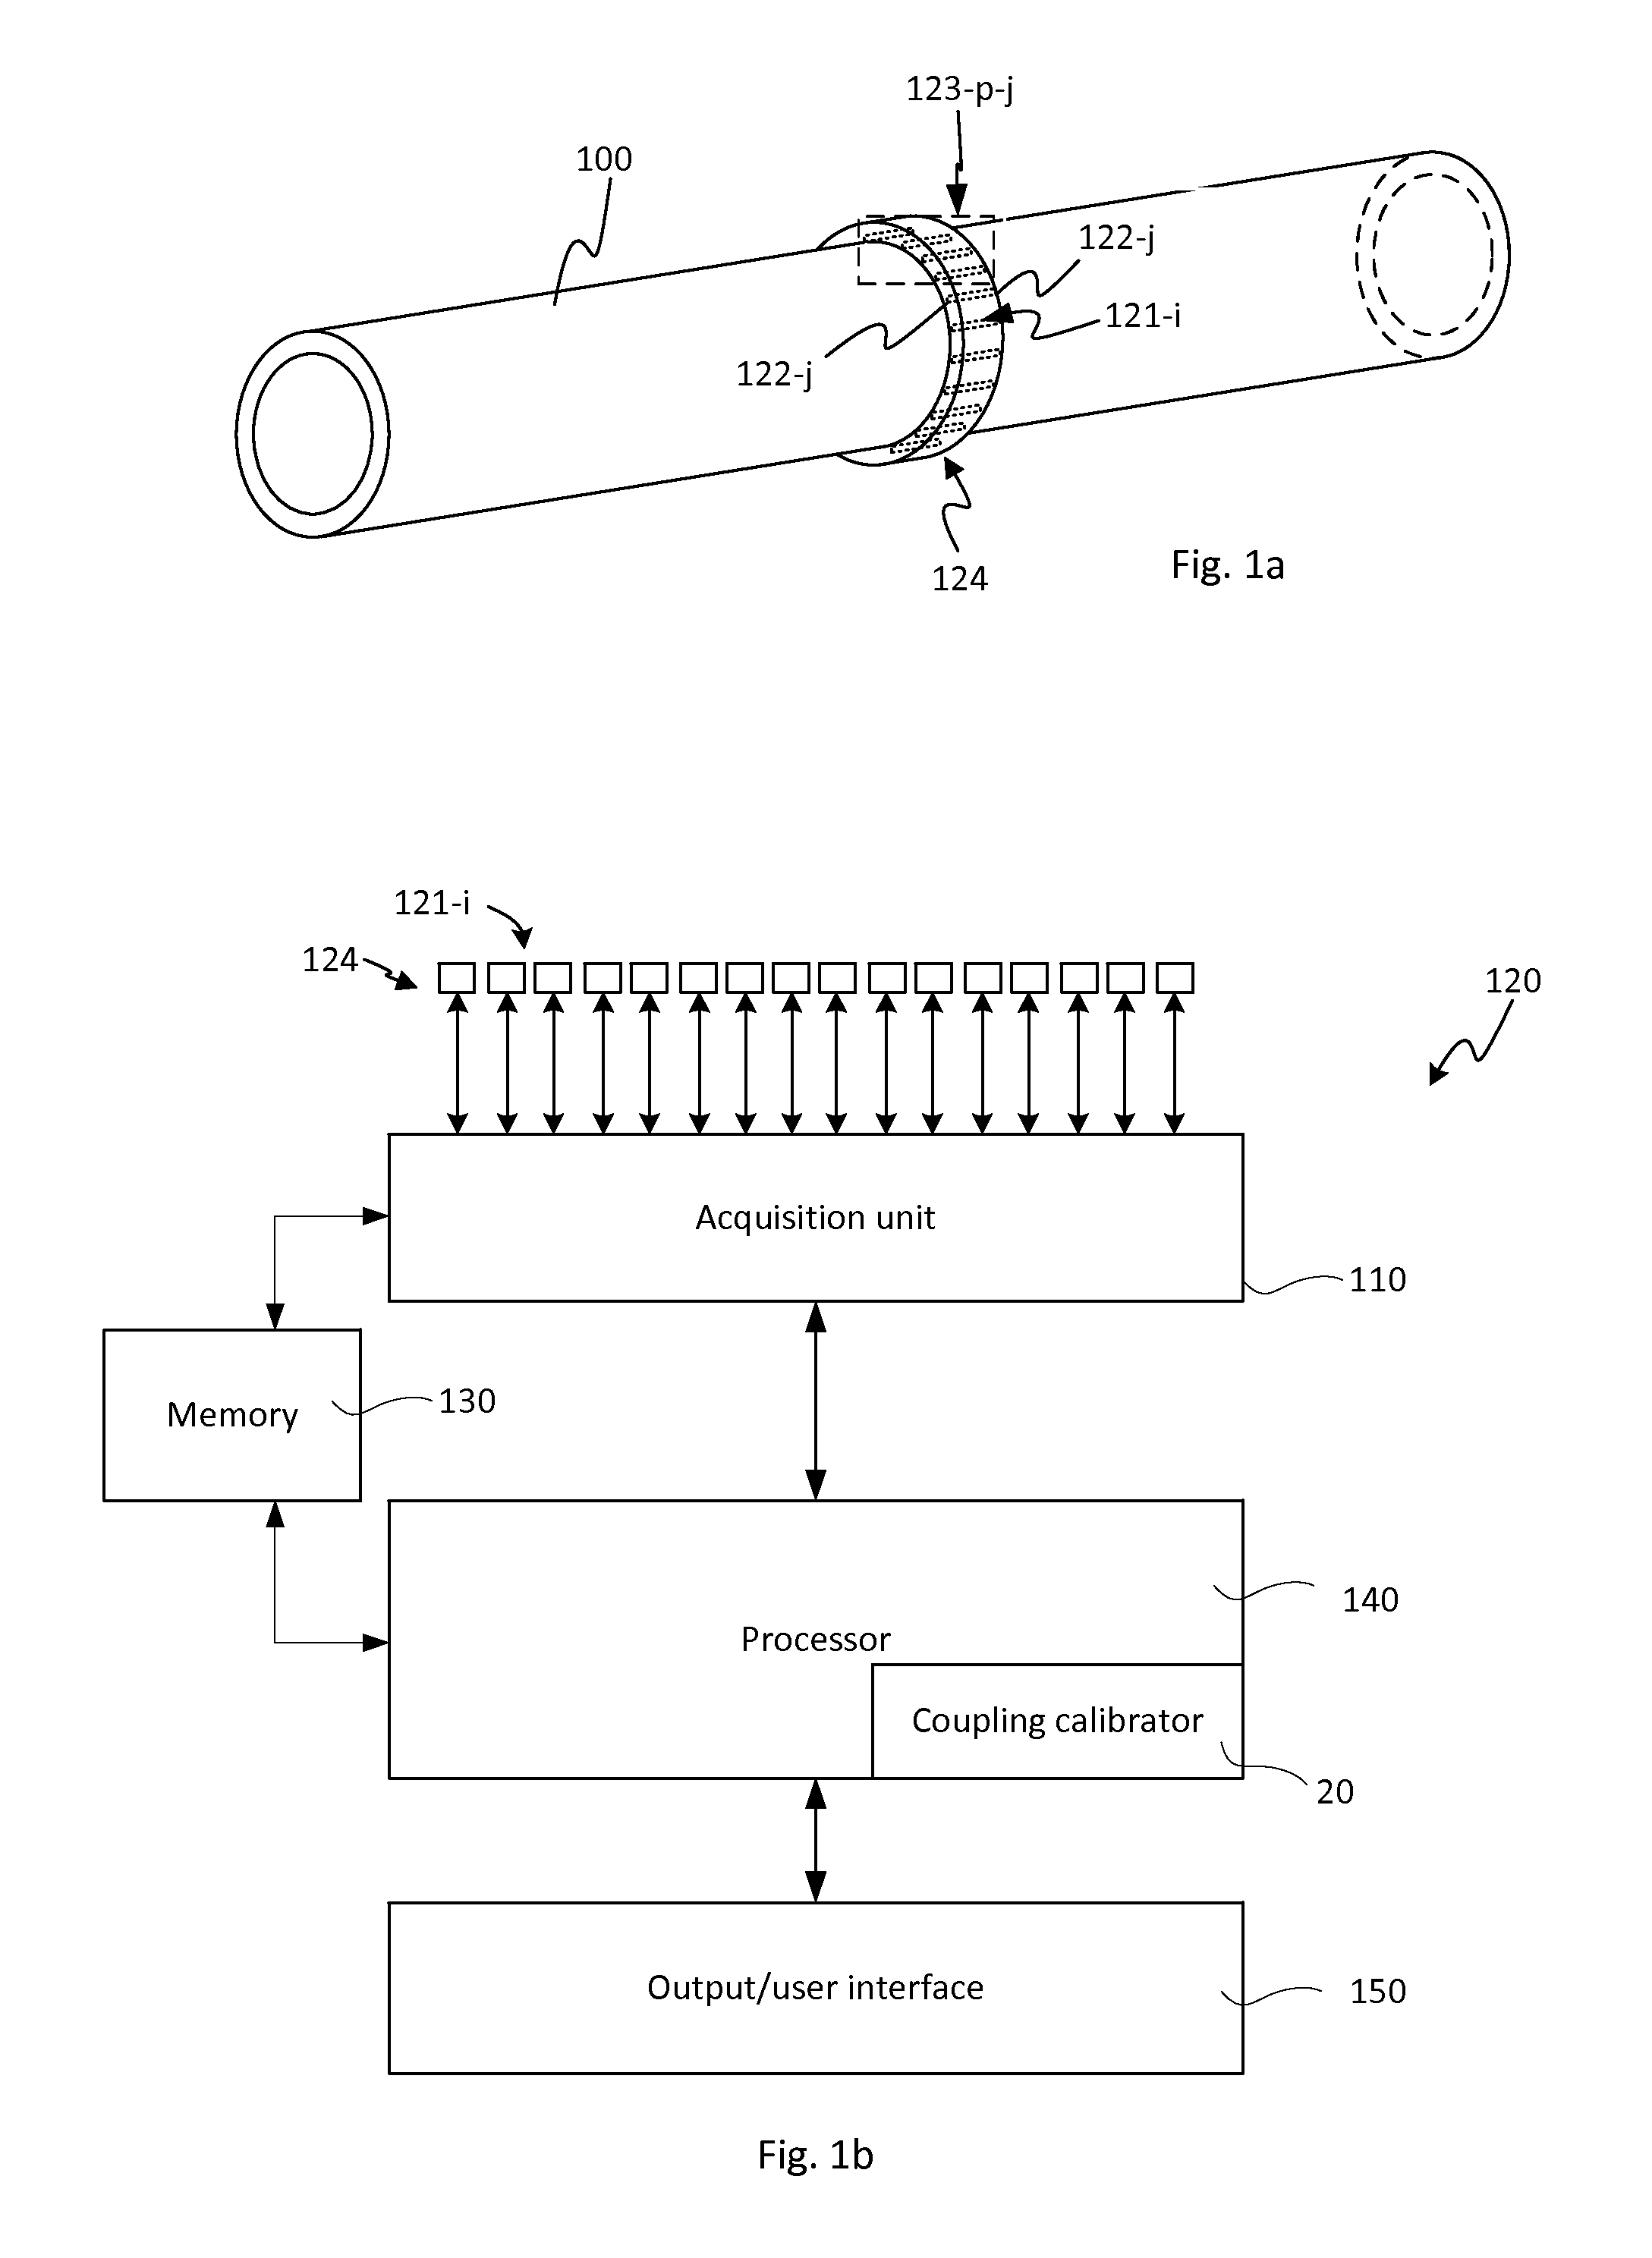 Method of conducting probe coupling calibration in a guided-wave inspection instrument